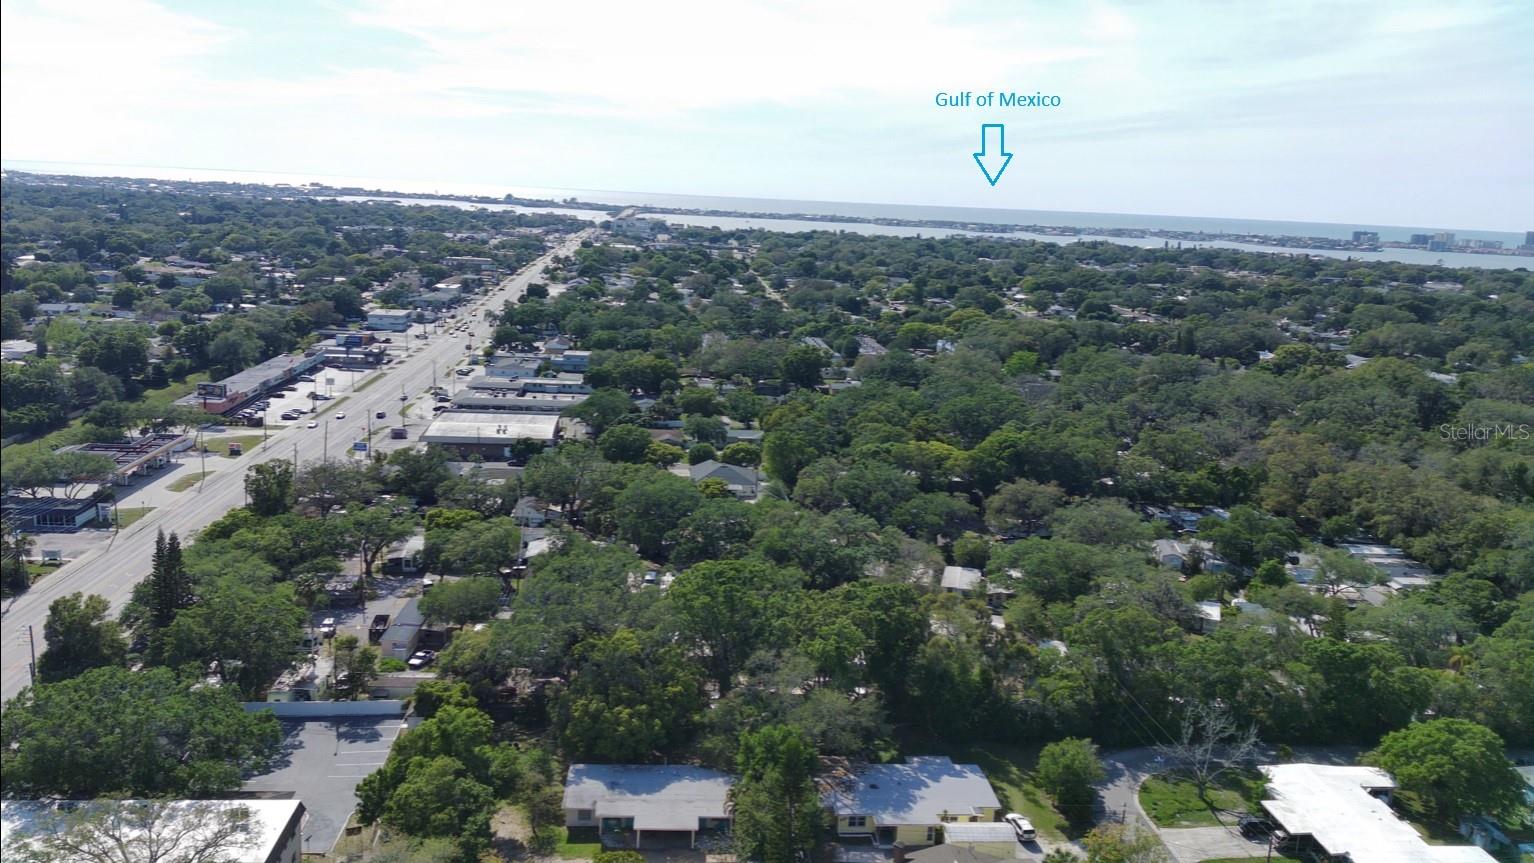 Gulf of Mexico from drone above house location